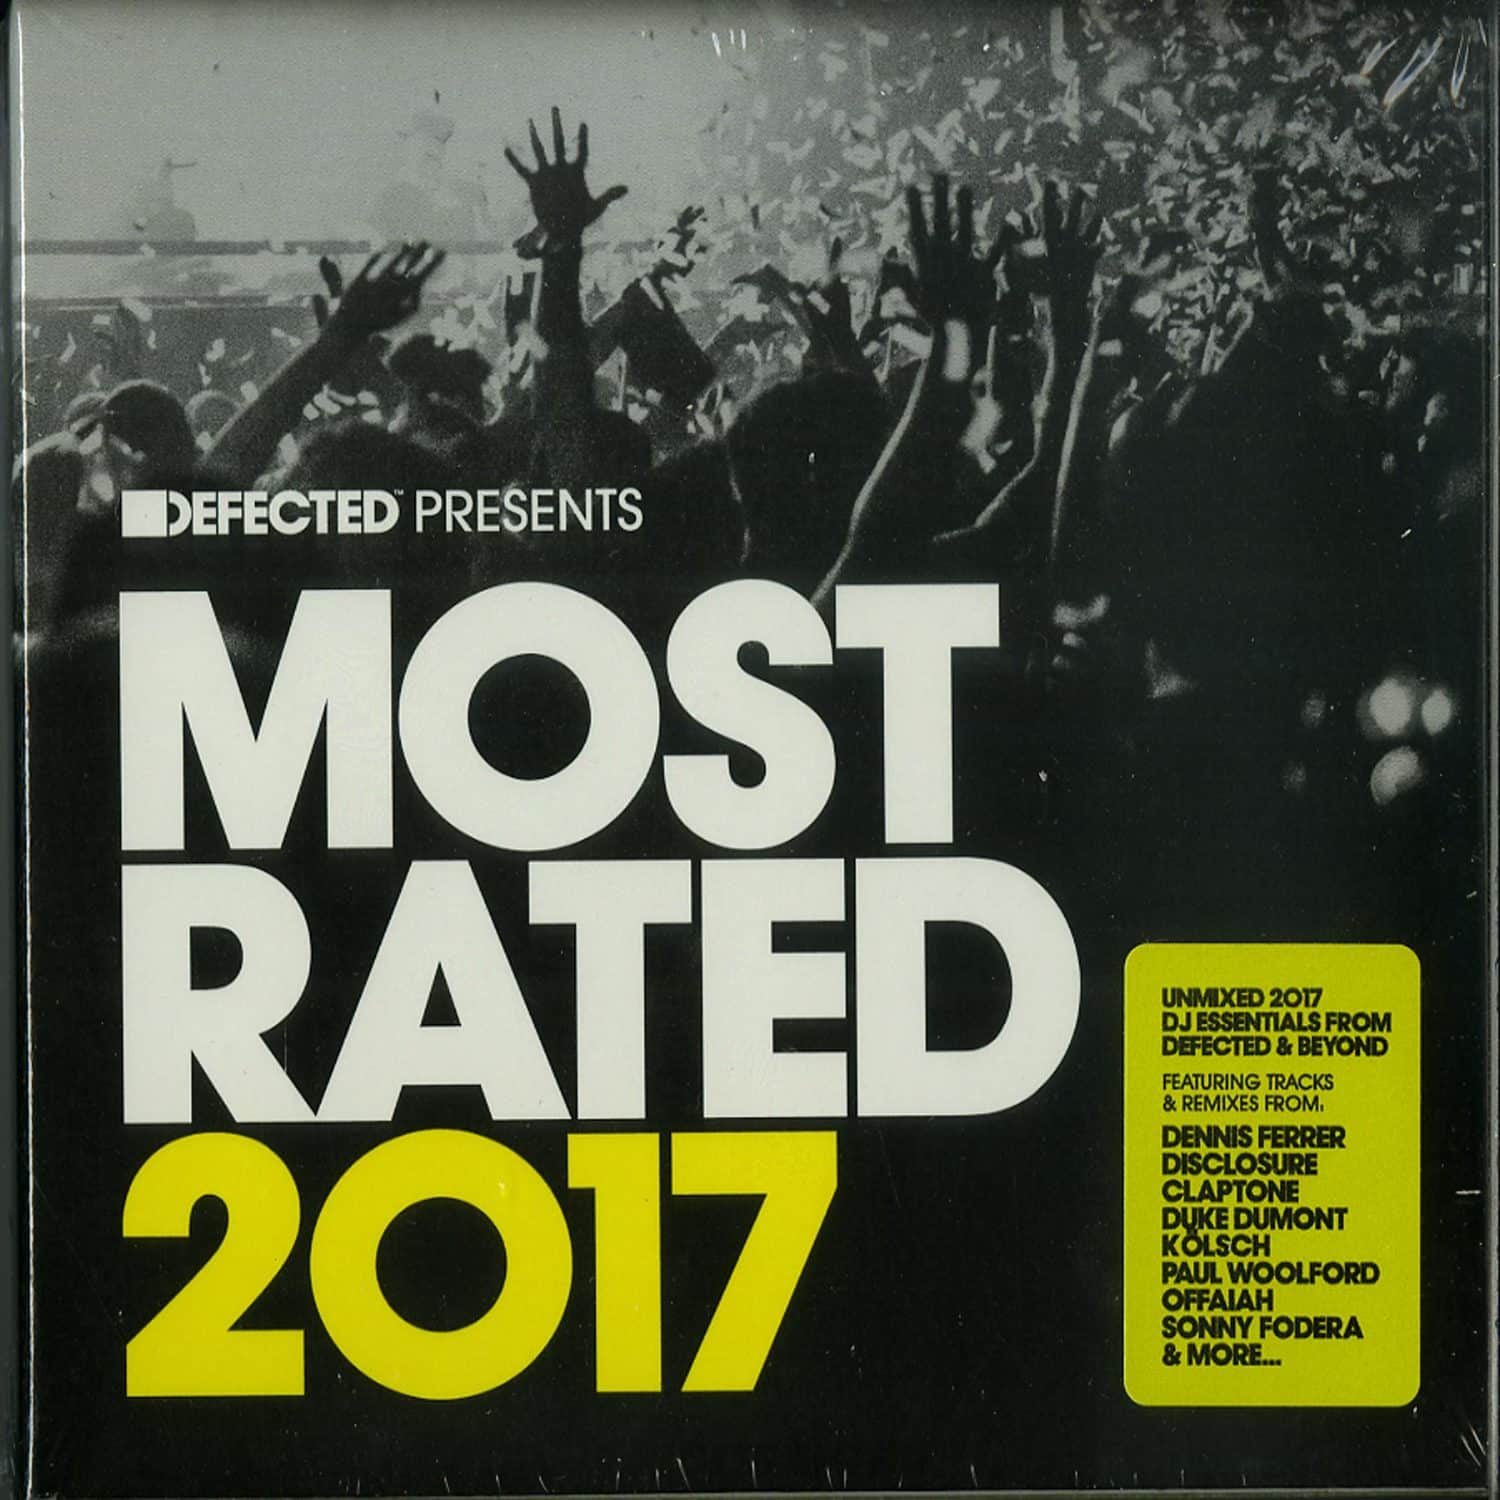 Various Artists - DEFECTED PRESENTS MOST RATED 2017 